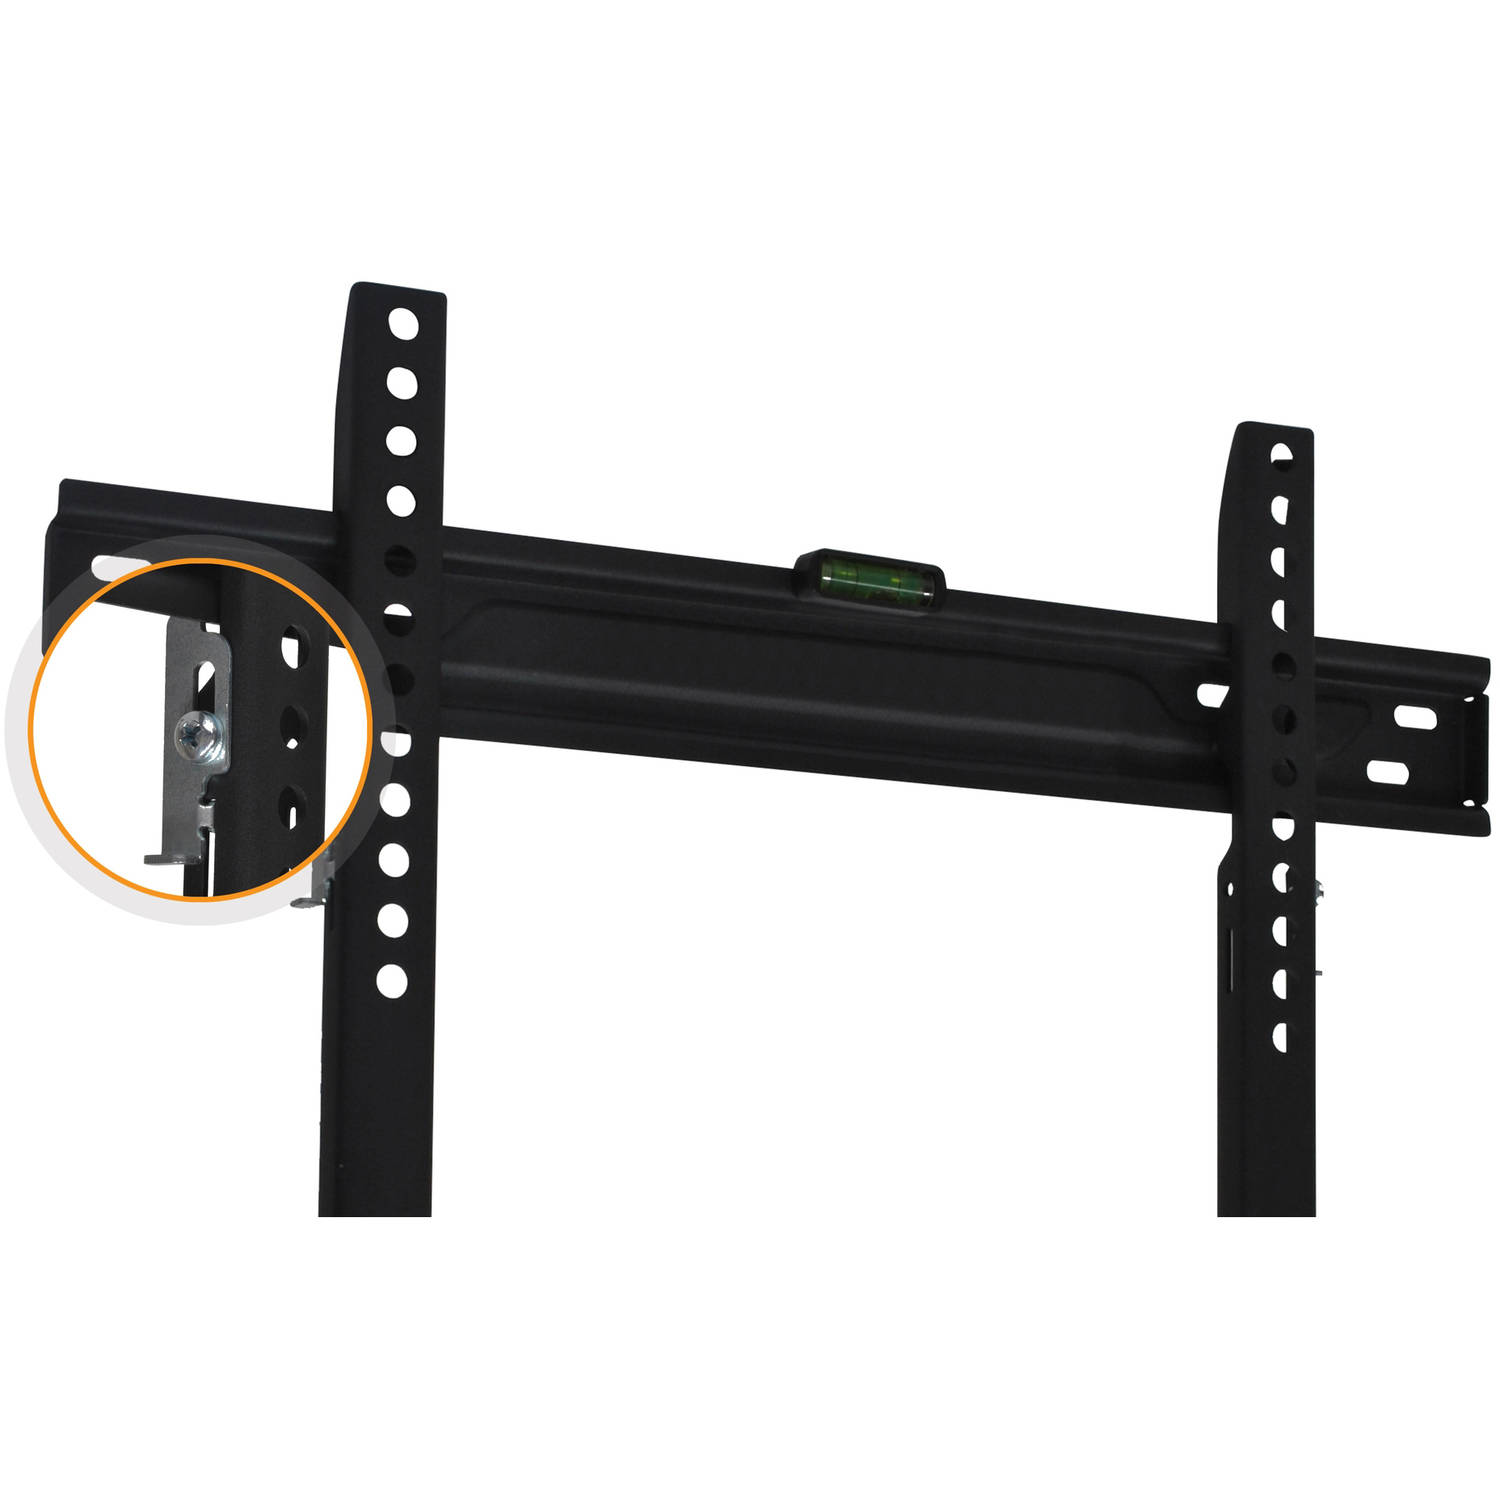 Low-Profile TV Wall Mount for 19"-60" TVs with HDMI Cable, UL Certified - image 2 of 8